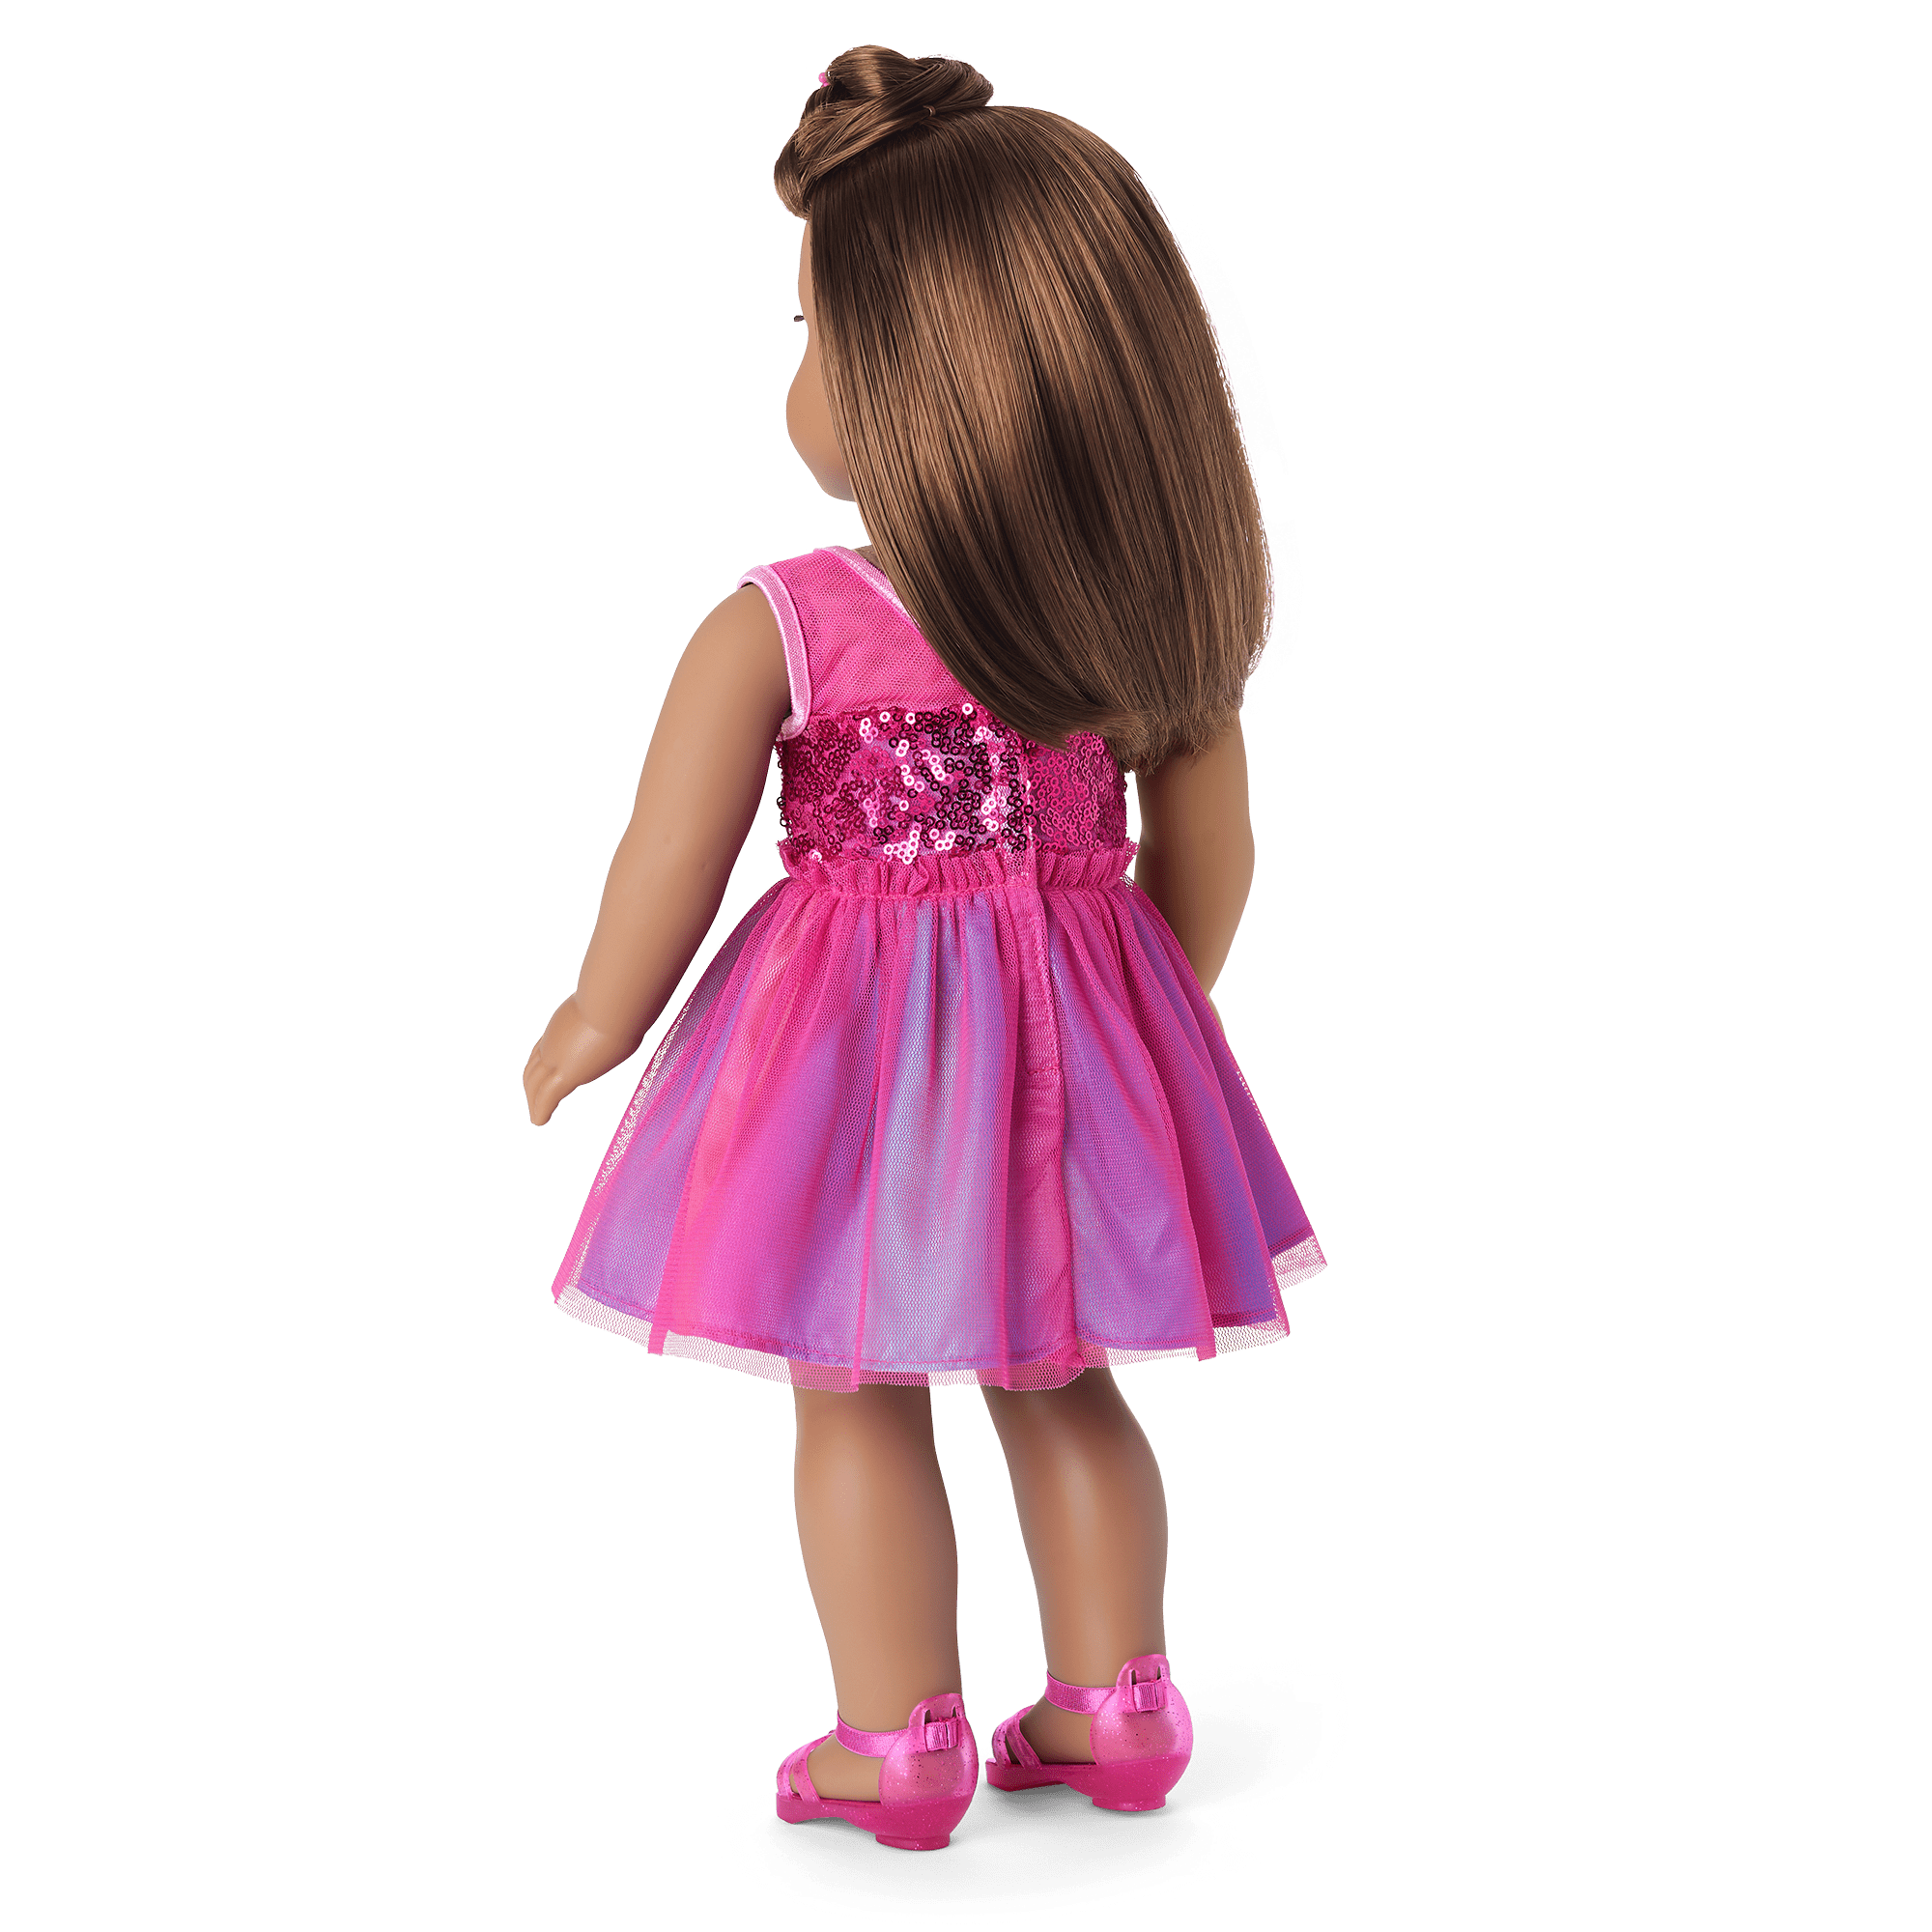 Let’s Have a Party Outfit for 18-inch Dolls